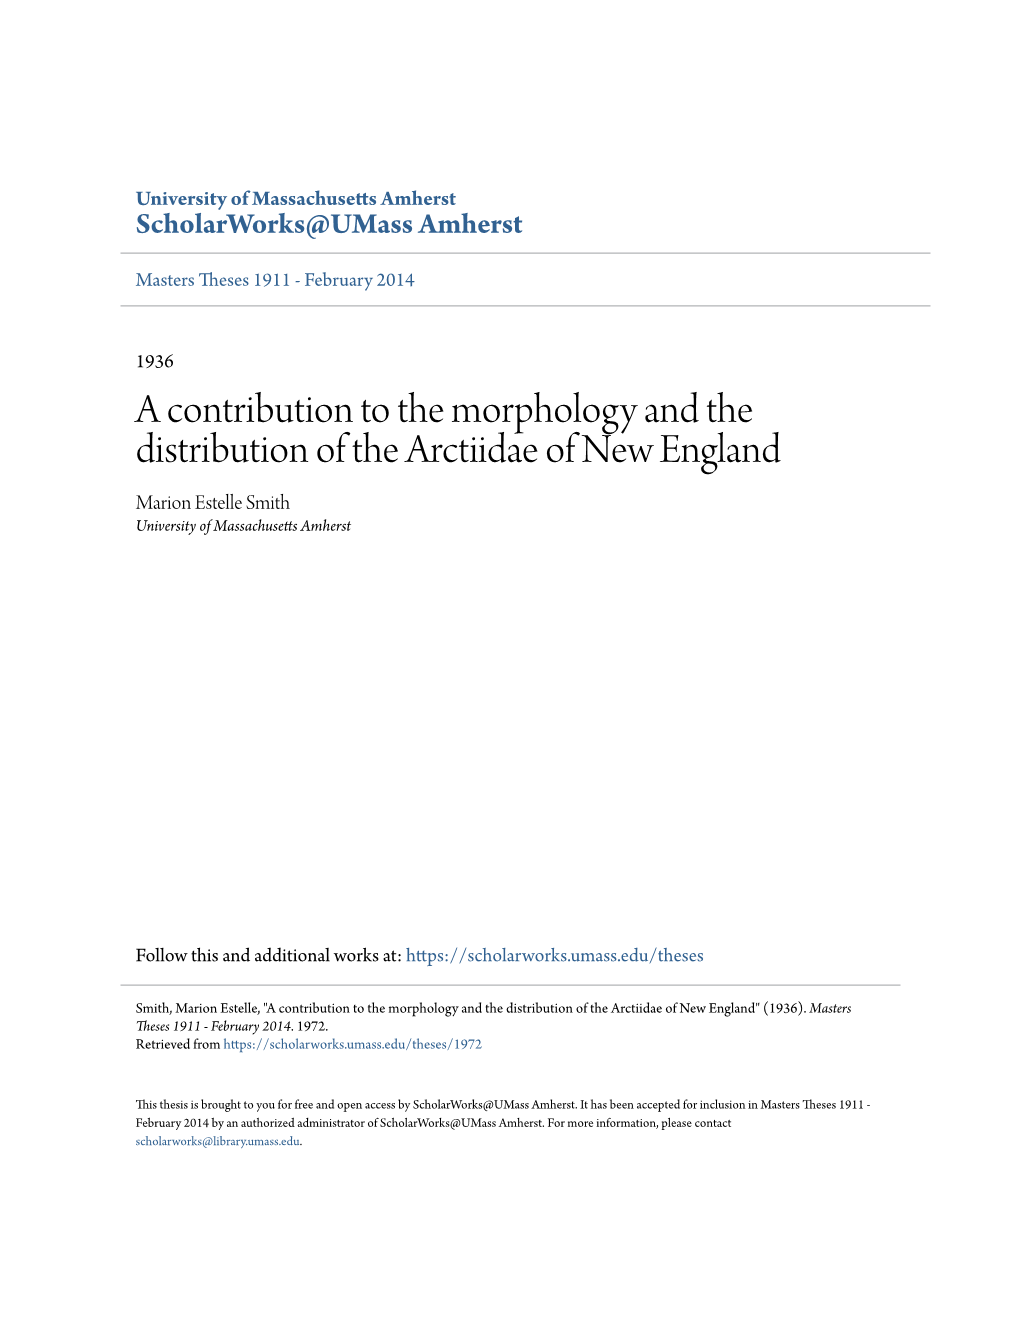 A Contribution to the Morphology and the Distribution of the Arctiidae of New England Marion Estelle Smith University of Massachusetts Amherst